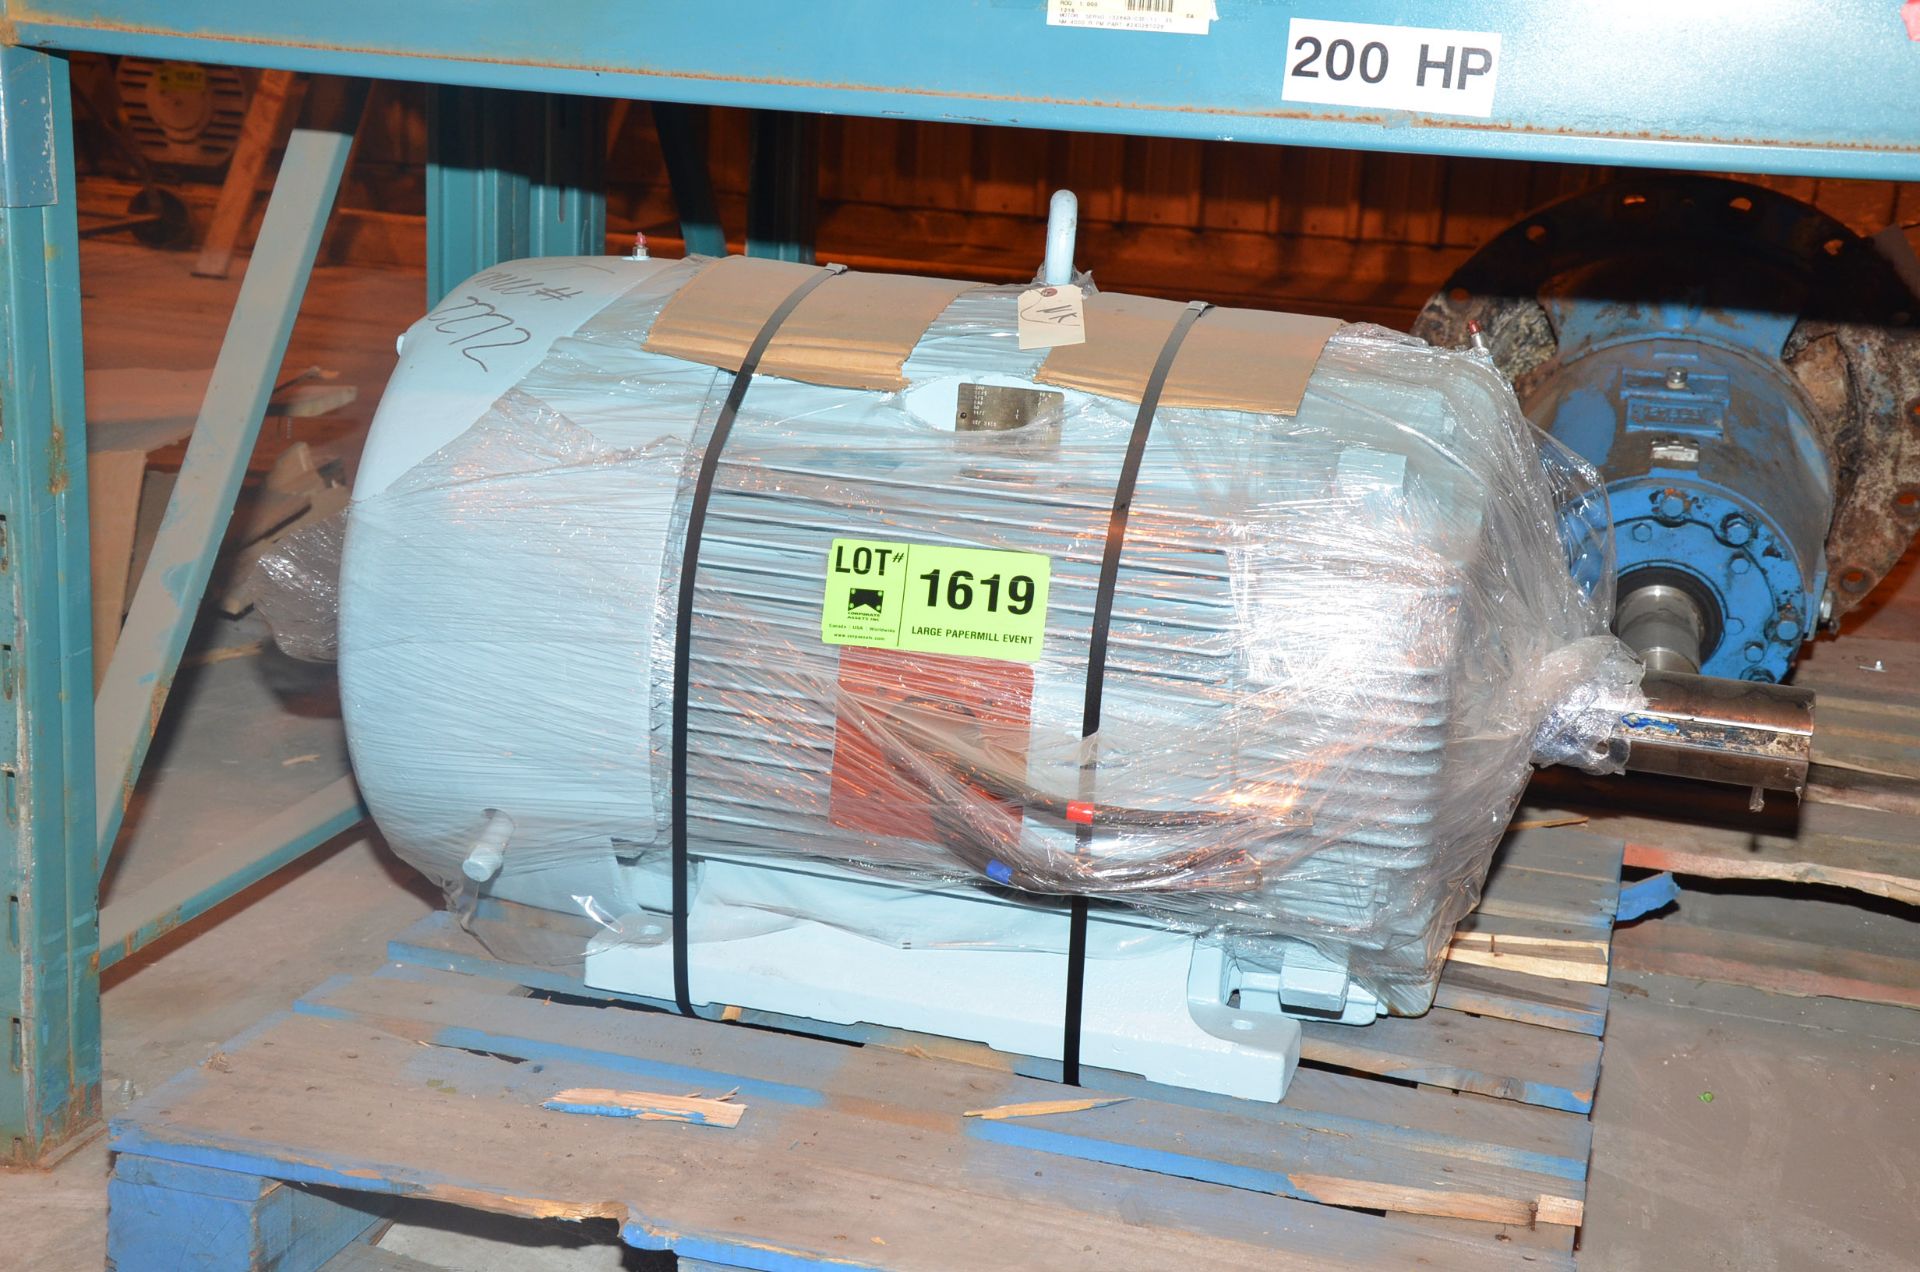 GE 200HP/1185RPM/575V ELECTRIC MOTOR, S/N N/A [RIGGING FEES FOR LOT #1619 - $60 USD PLUS